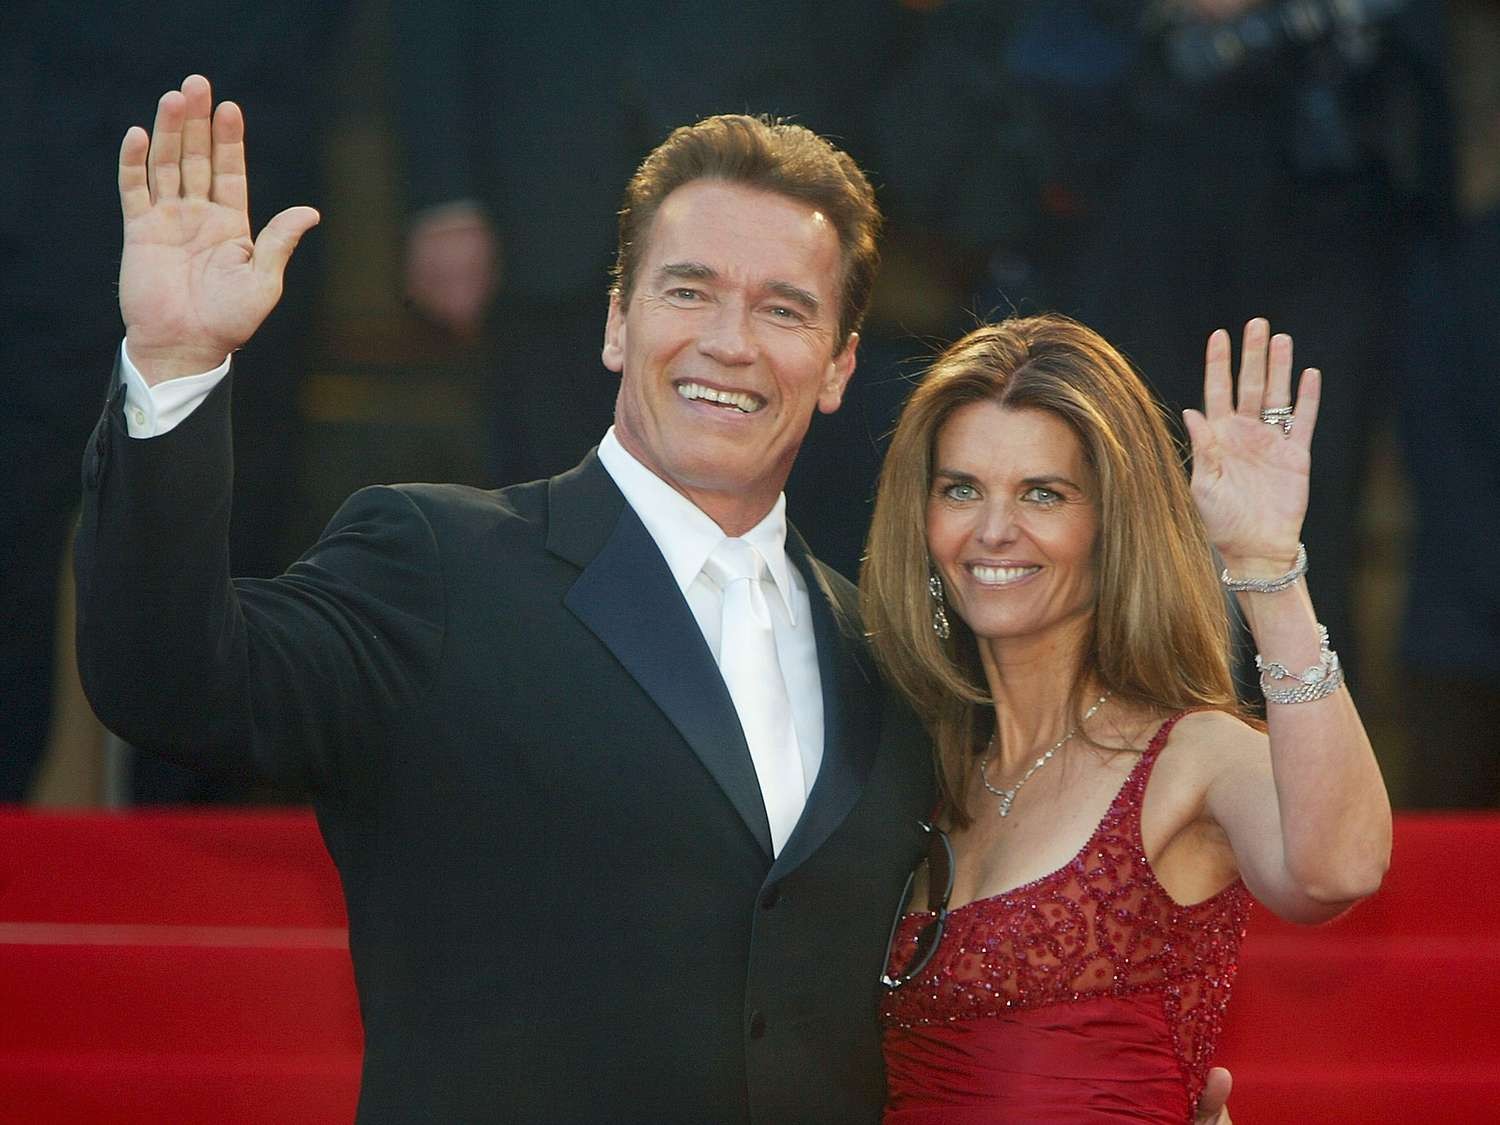 Arnold Schwarzenegger and his wife